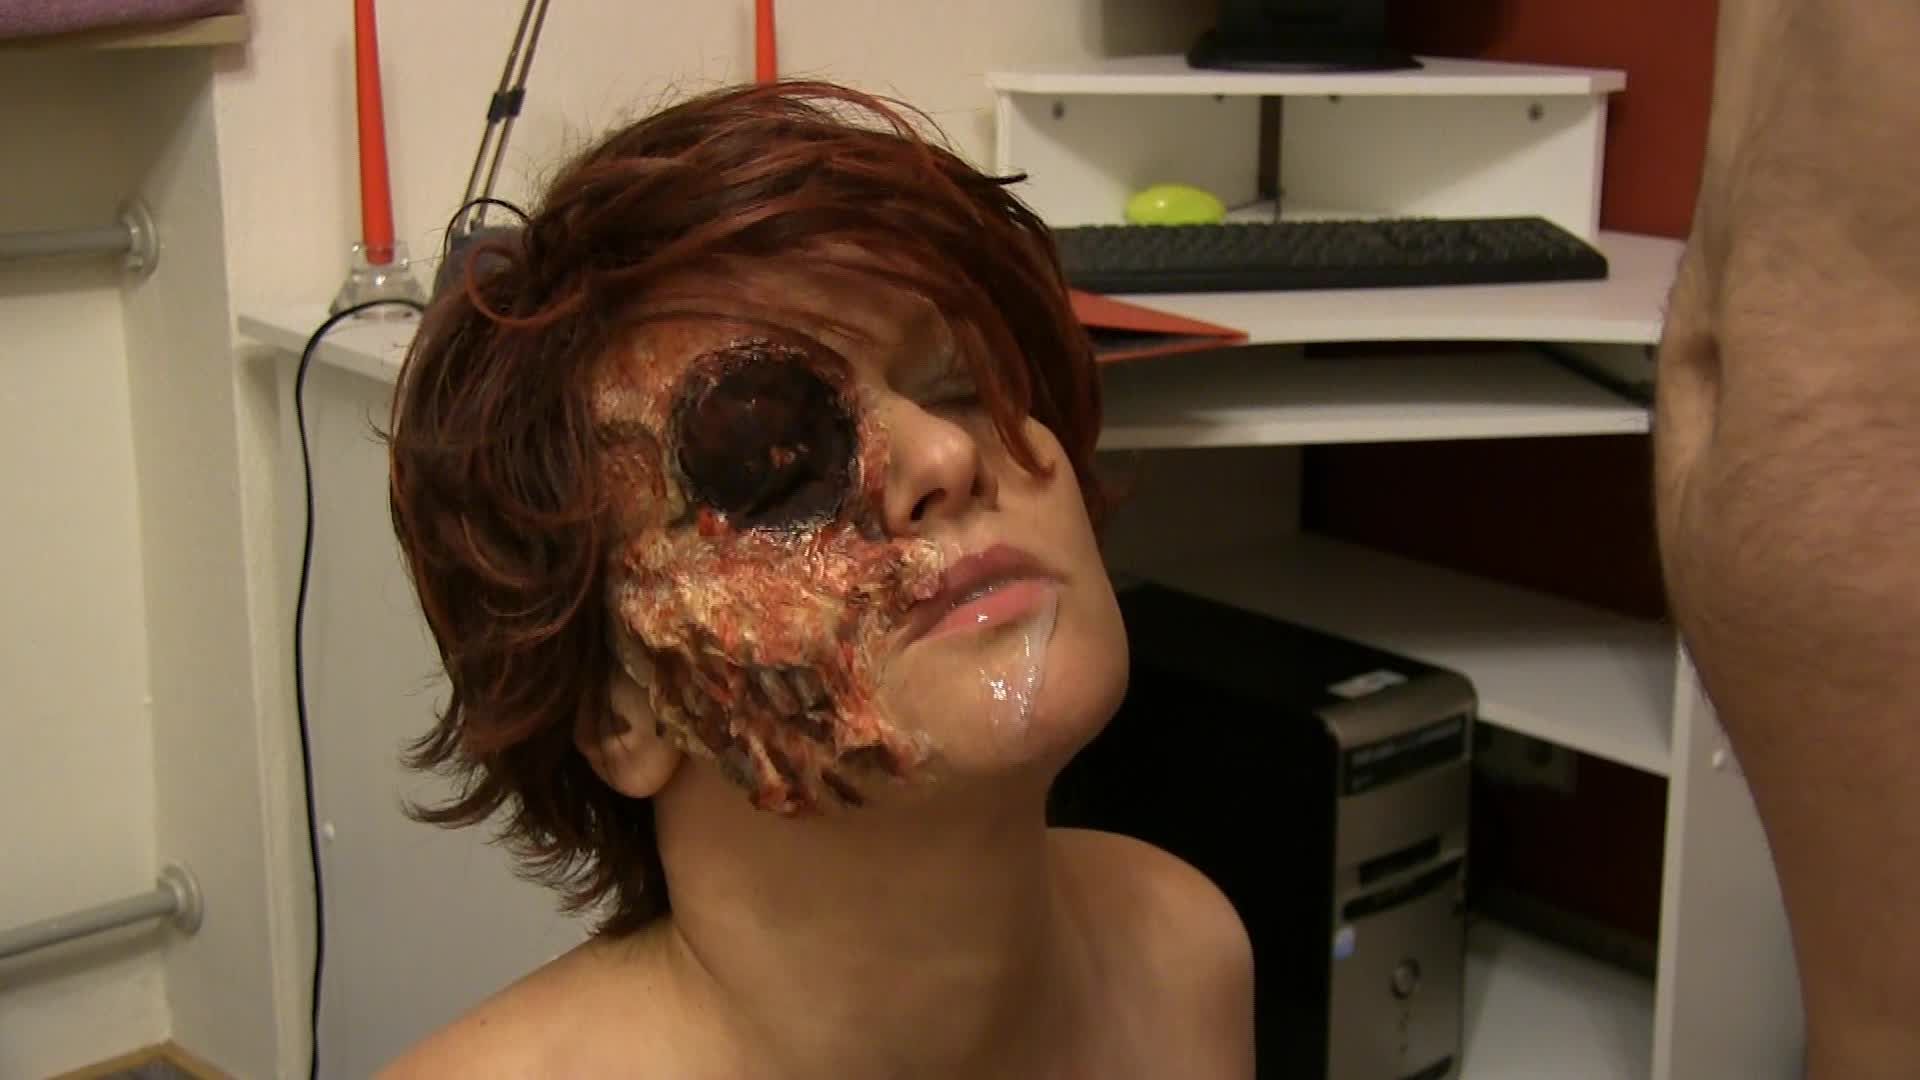 Horror sex with a zombie